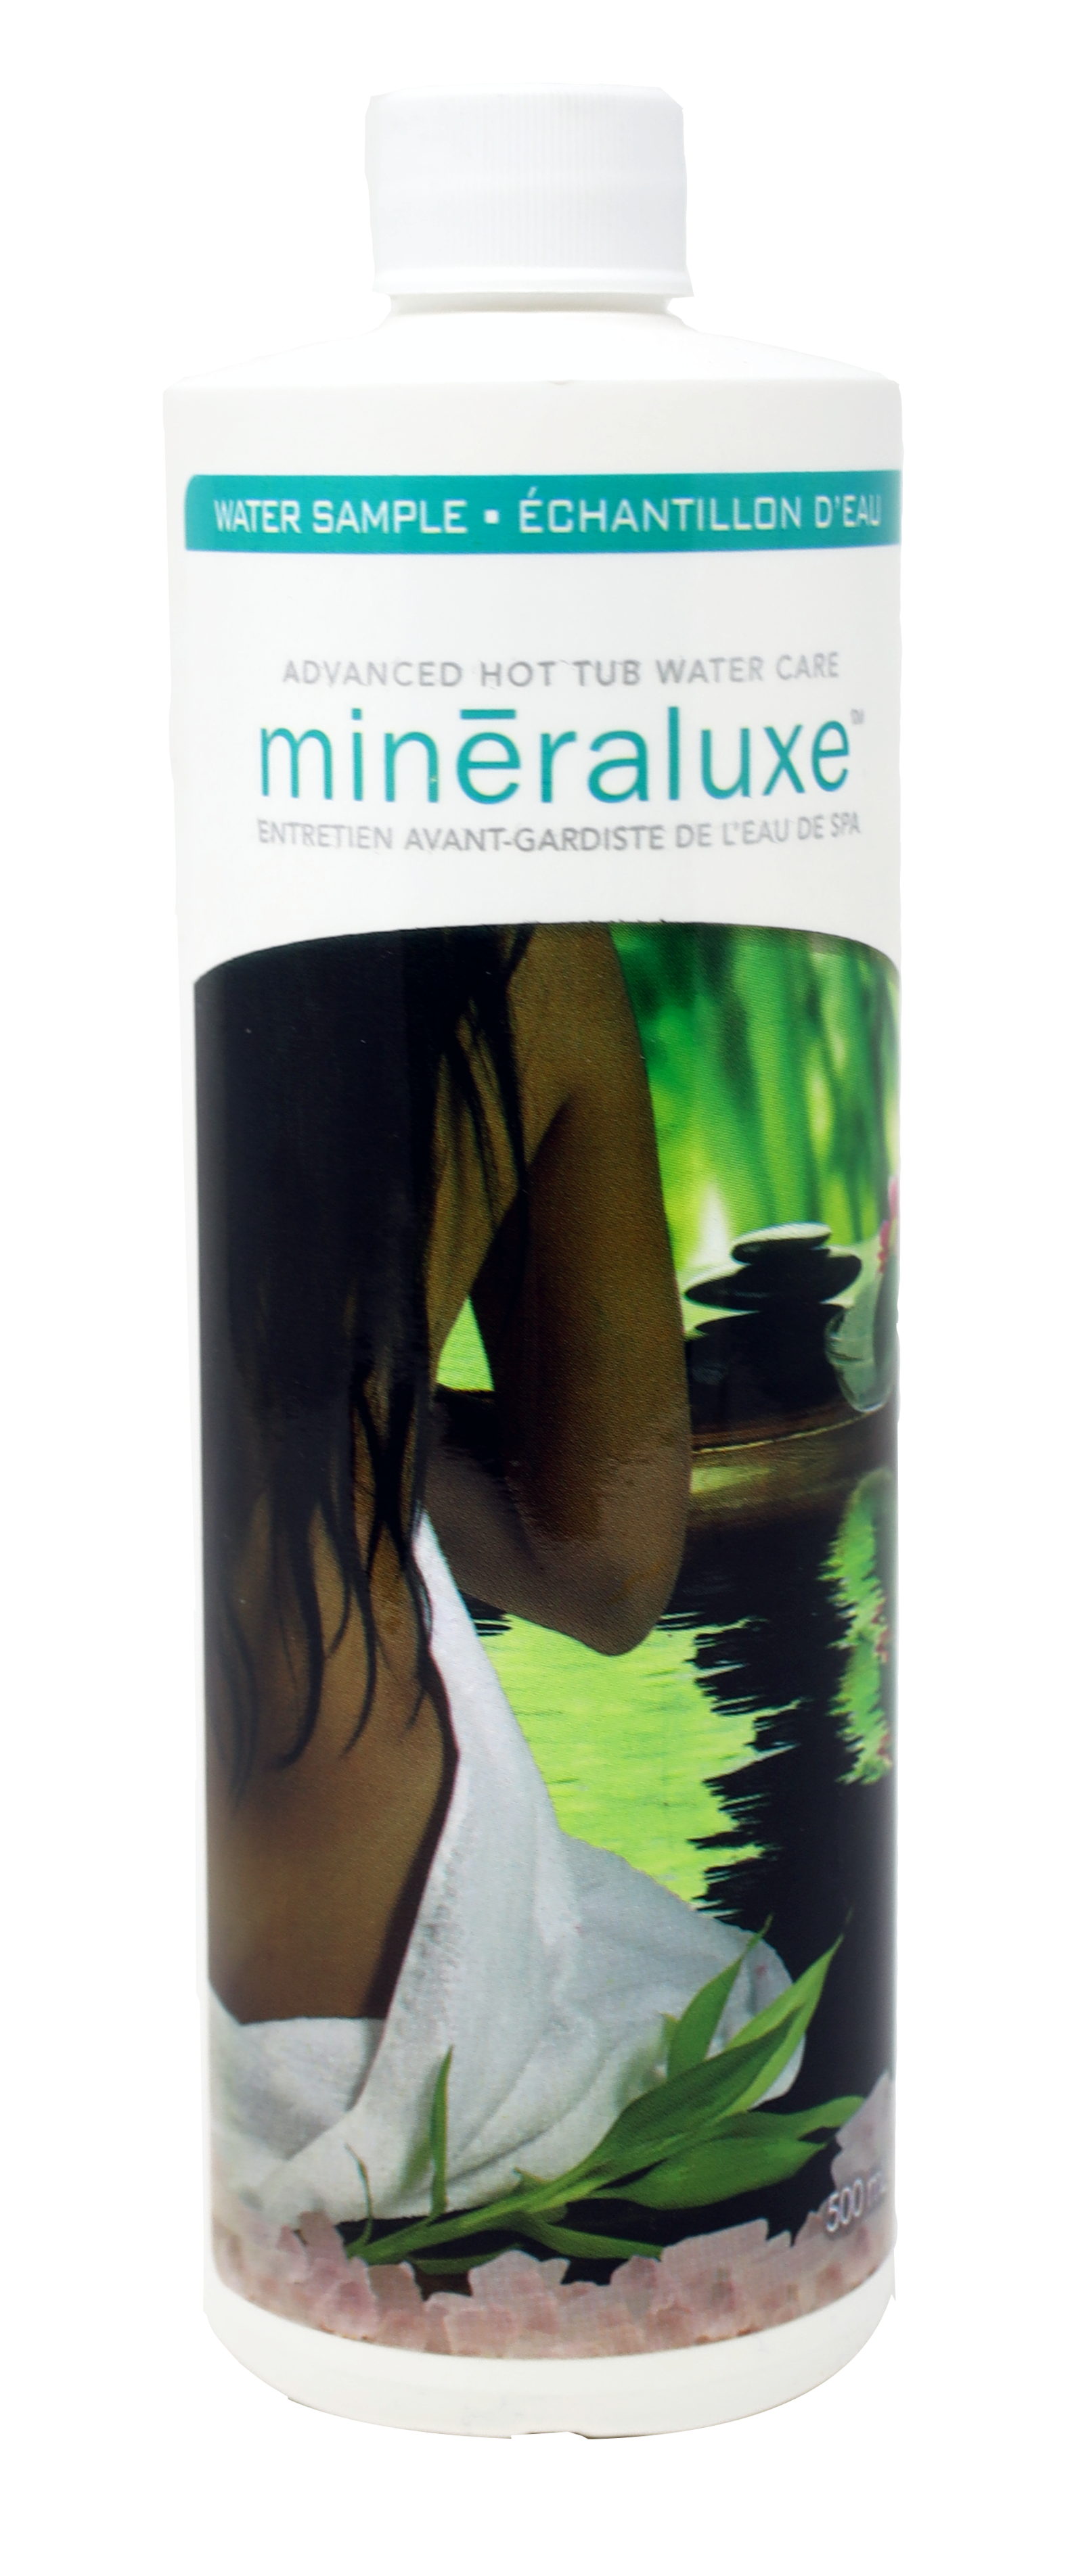 Mineraluxe Water Sample 1 X 1 Pint - SPA CHEMICALS